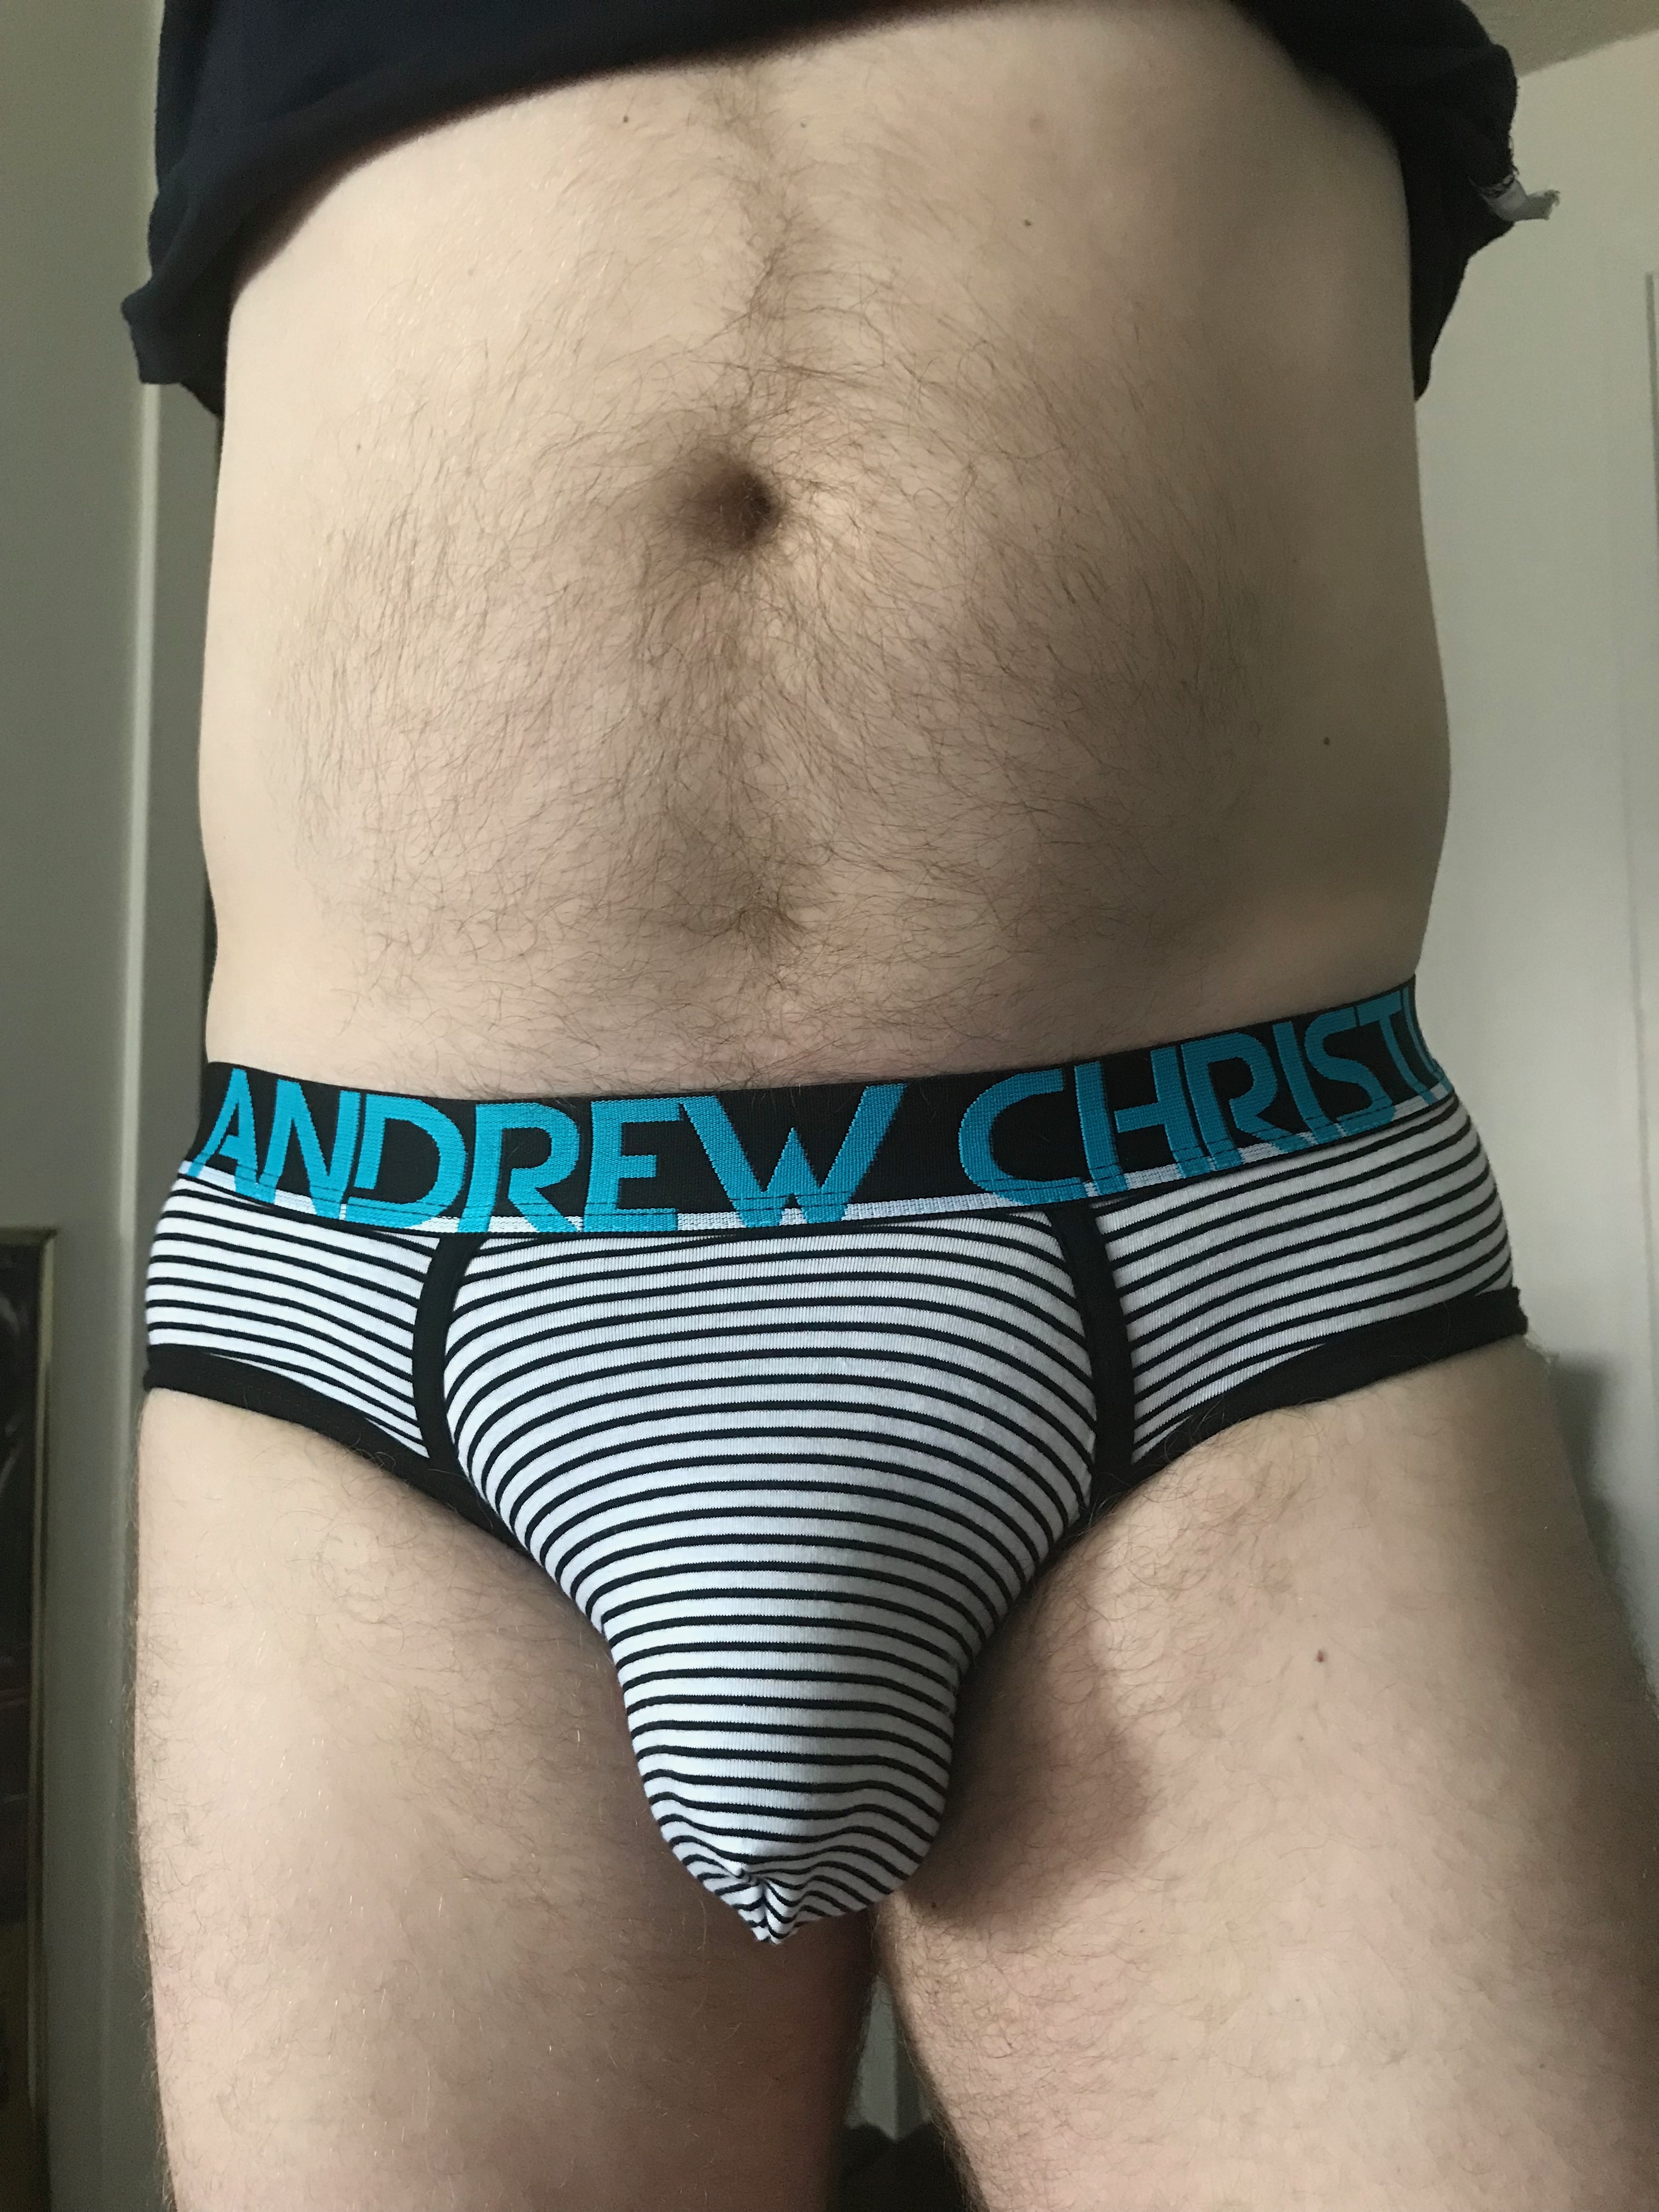 The boy in the striped undies…at least for today anyway…